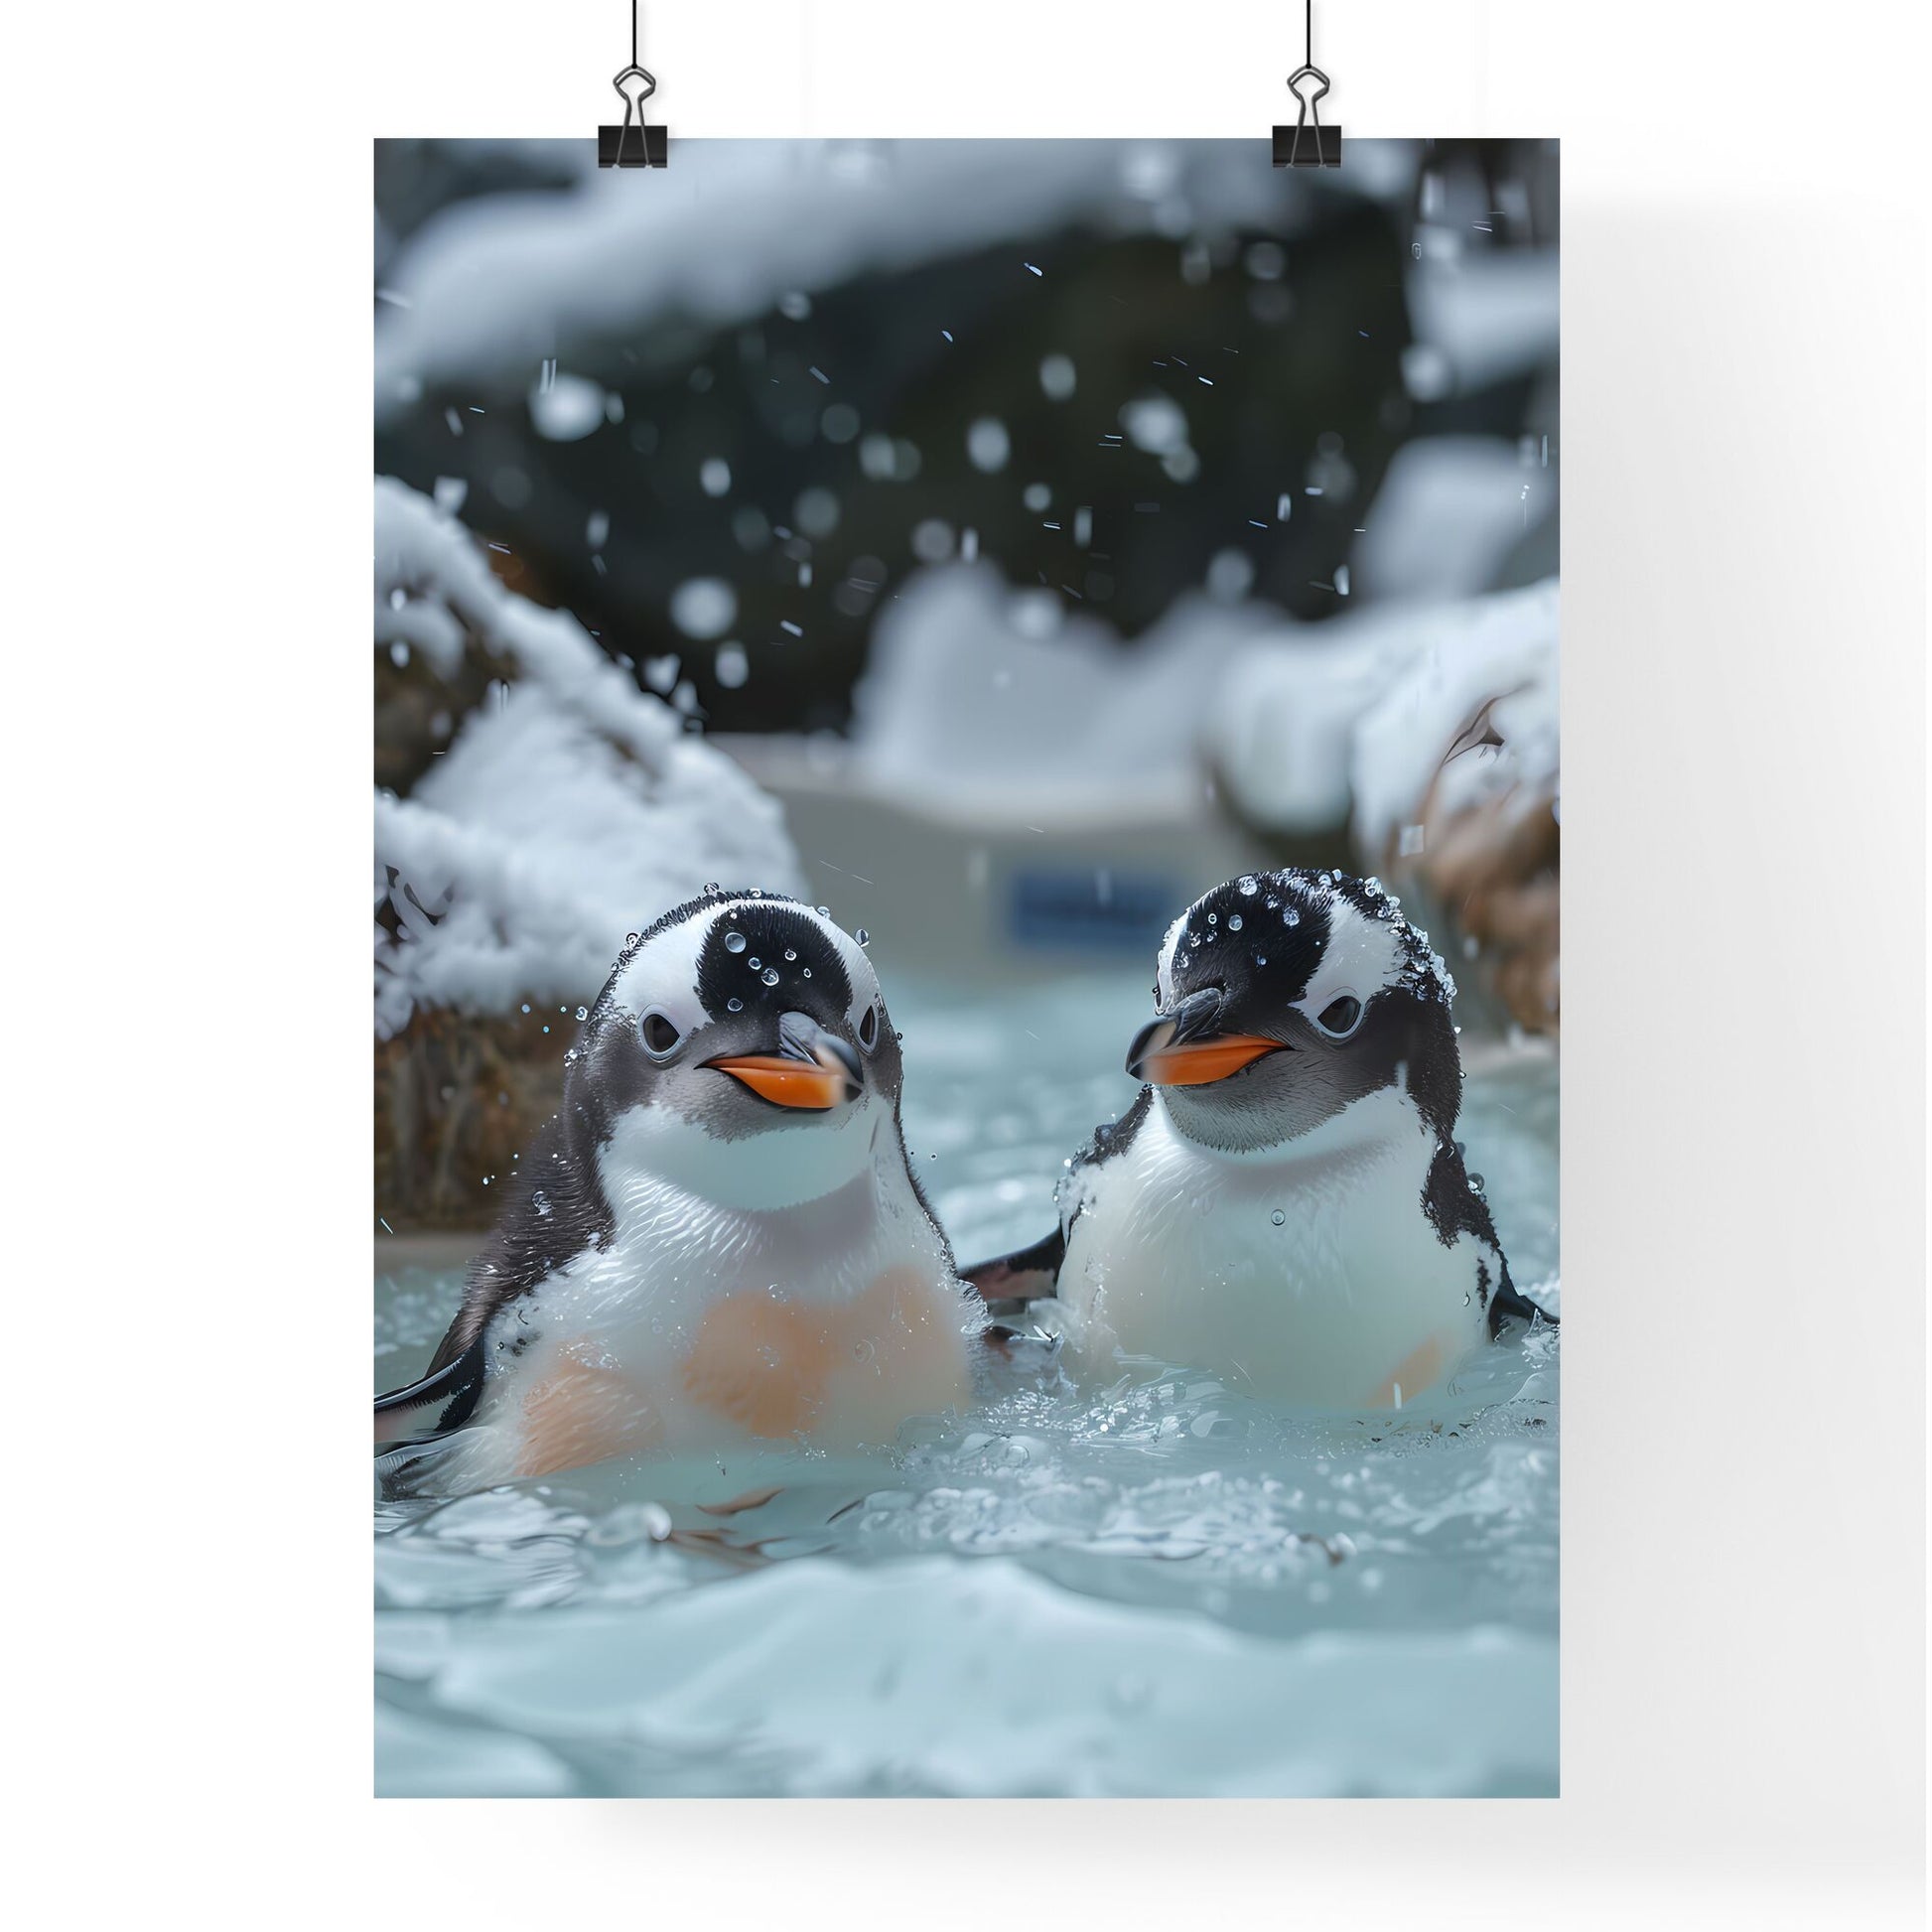 Whimsical Penguin Bathtub Buddies: Art Photography Inspired Storybook Illustration Featuring Penguins Playing in Snowy Water Default Title